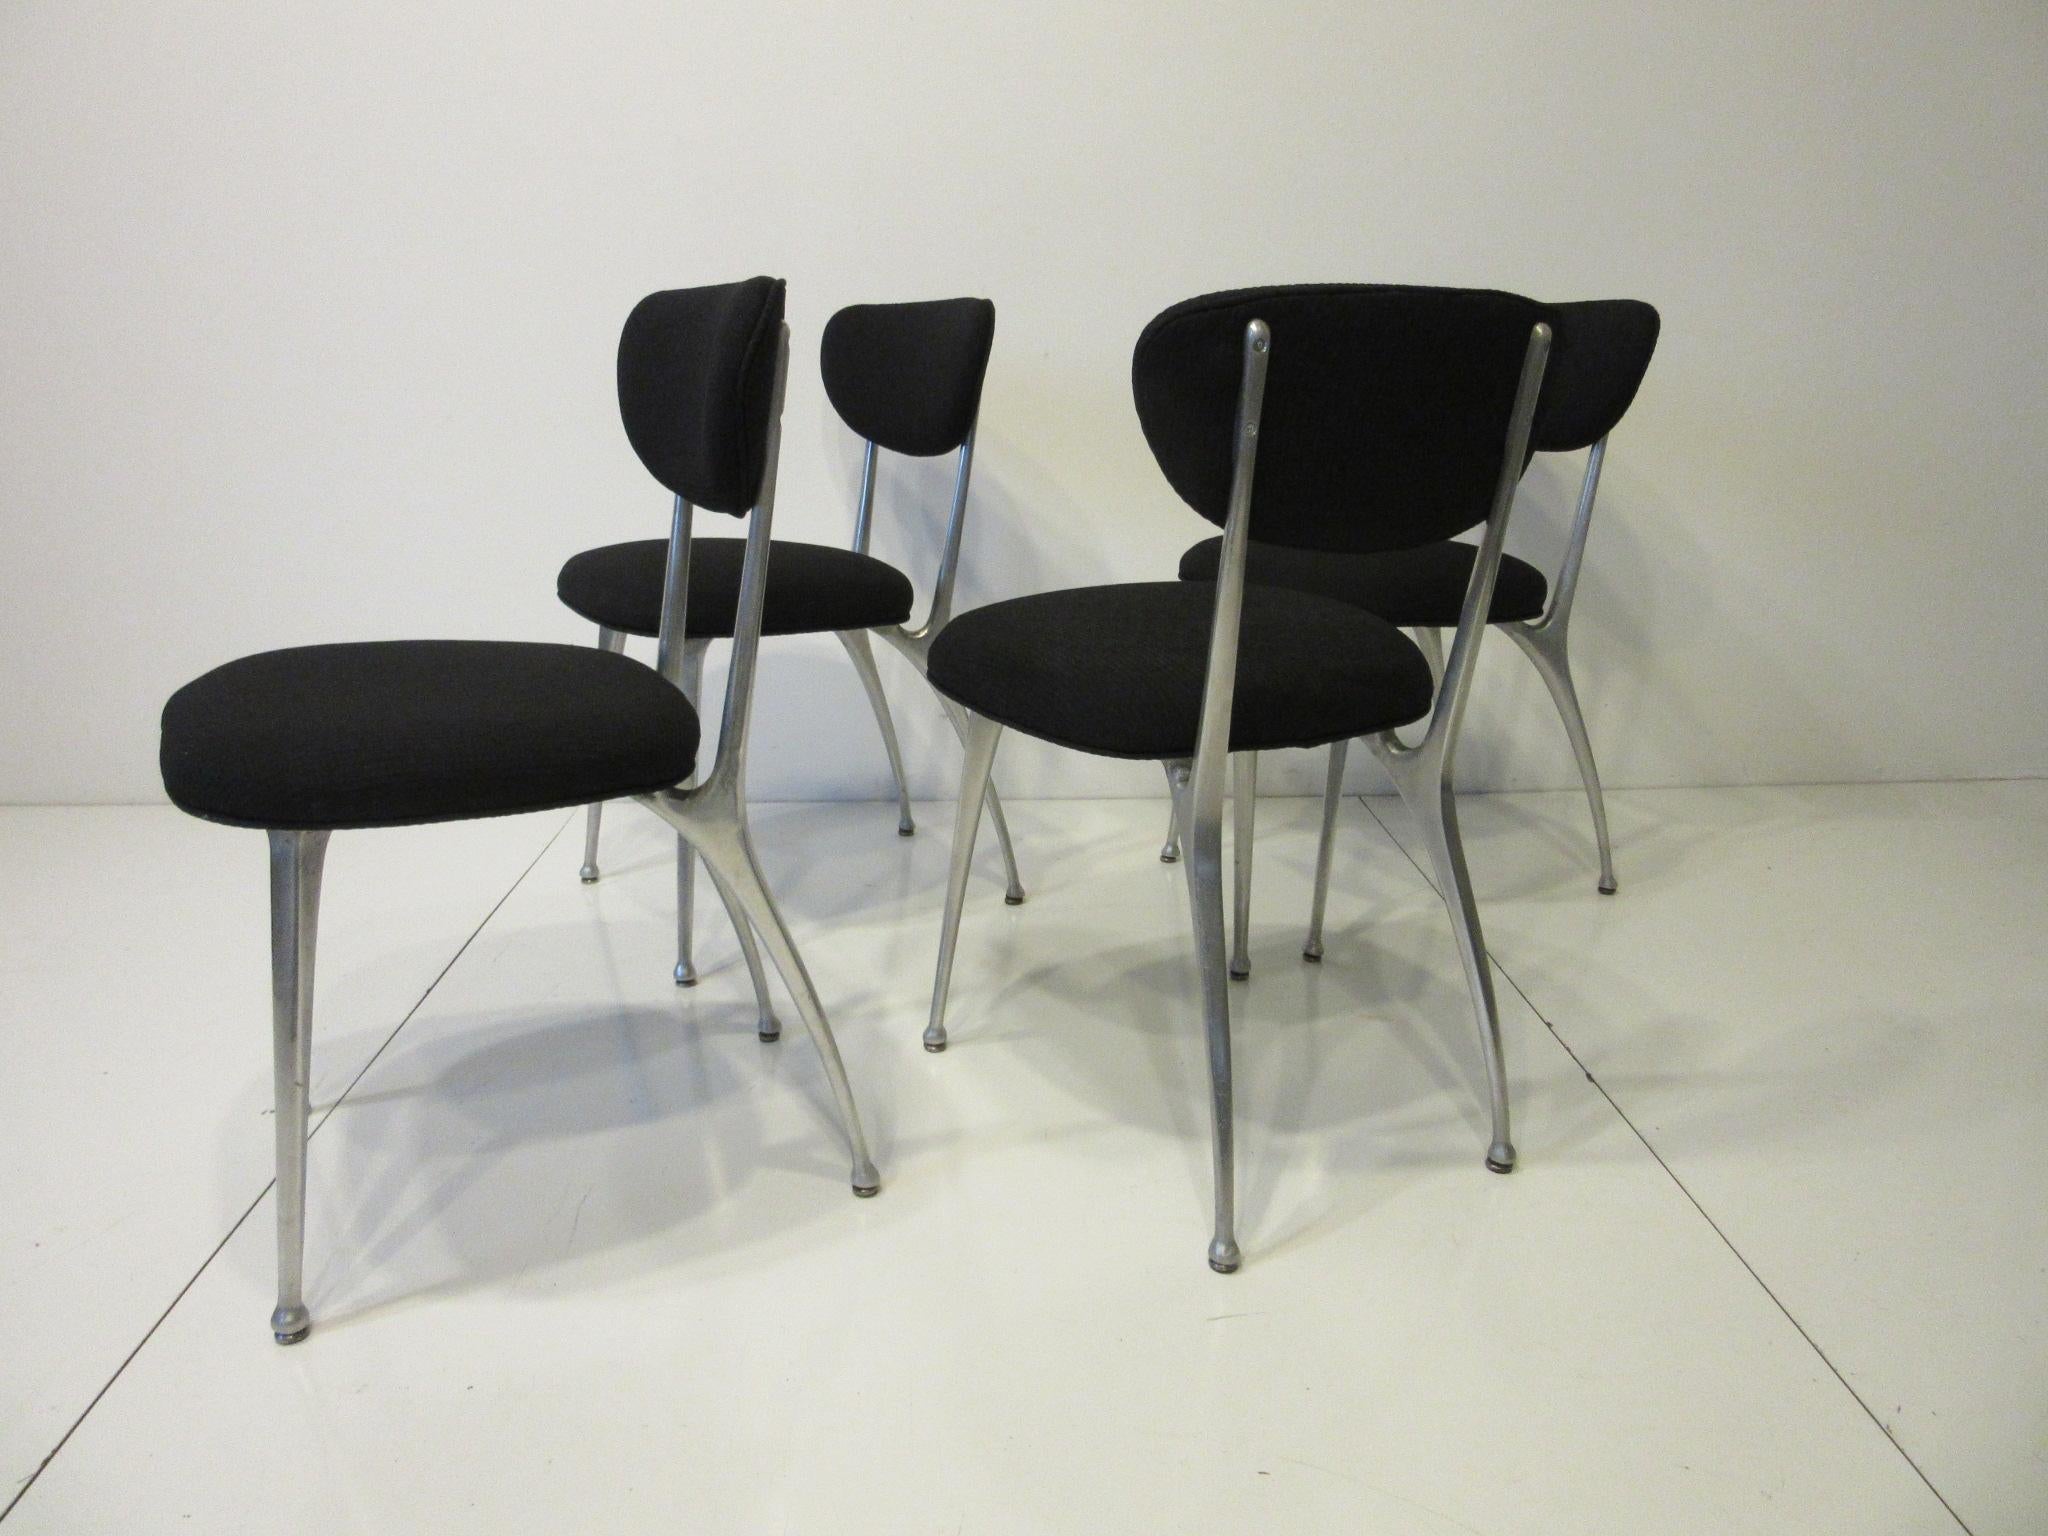 Gazelle Cast Aluminium Upholstered Dining Chairs by Shelby Williams 4